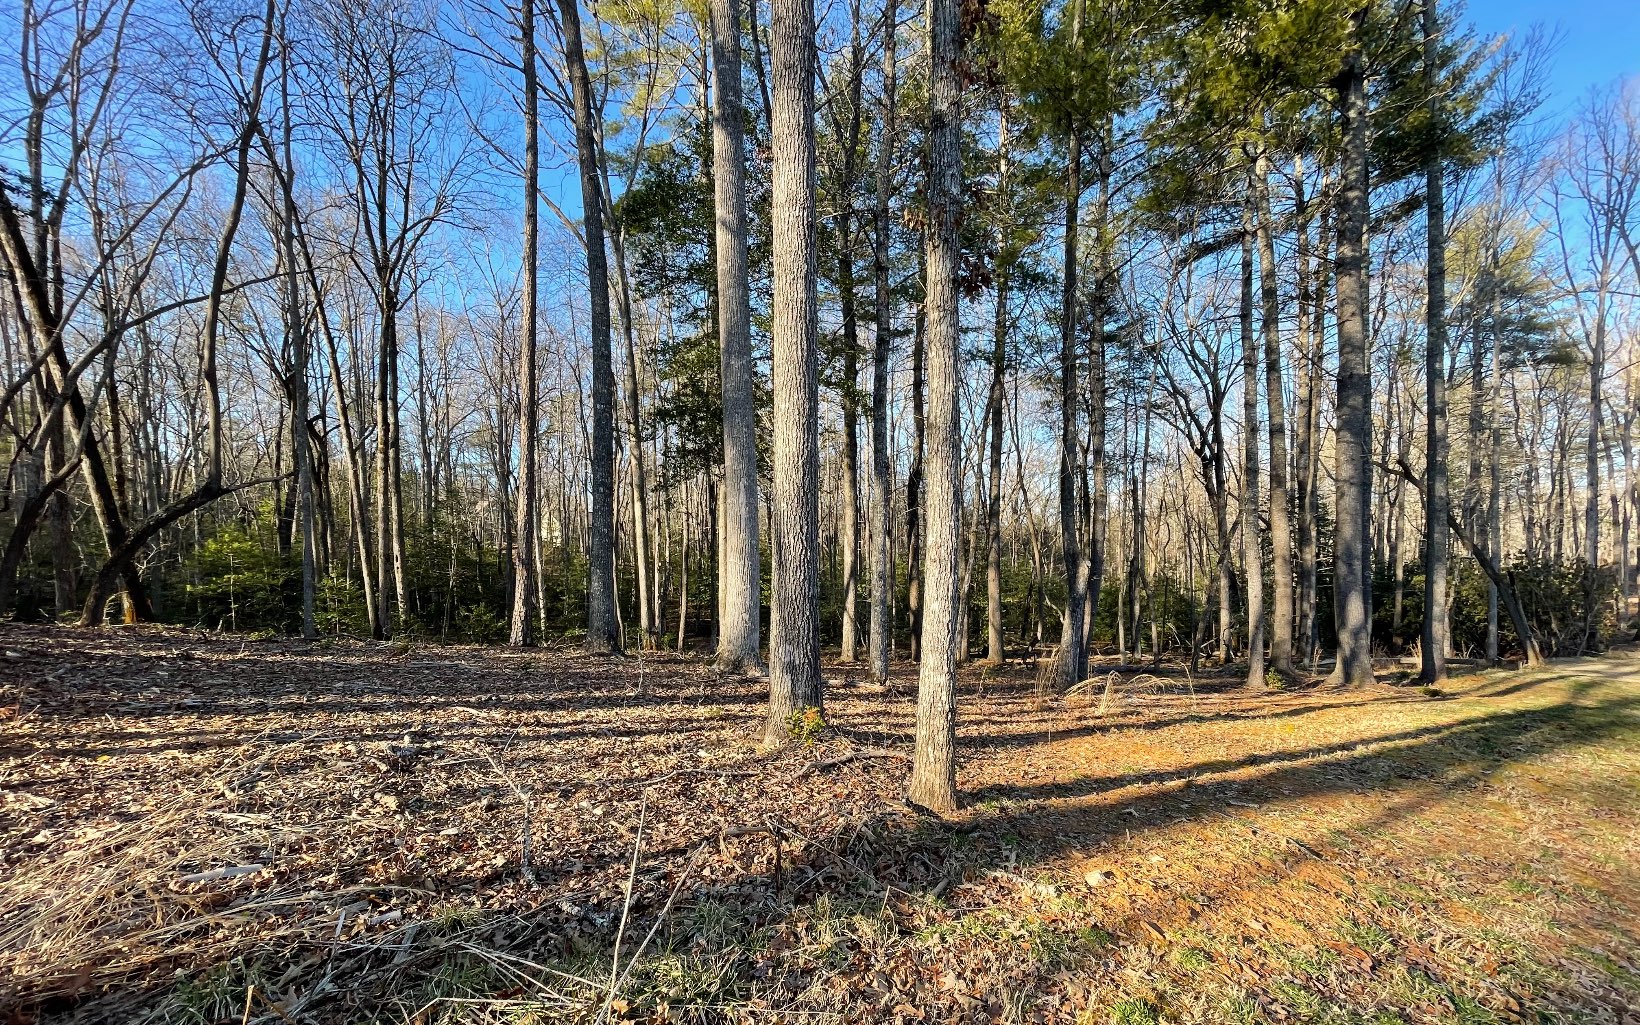 Here is your chance to build in Blairsville's newest Lake Community Highland Park on beautiful Lake Nottely! This 1.05 acre lot offers seasonal views & borders a small stream in a private setting.The terrain is gentle, but would make a great basement lot! Community offers lake access, paved roads, amazing mountain & lake views, fiber optic internet, underground utilities (power/water) & gated access. The clubhouse is lakefront with a salt water infinity pool, full kitchen, outdoor fireplace, lots of decking overlooking the lake, exercise room, theatre room, childrens play room, pool table/game room & boat slips. This is the place to live! Low HOA is only $600/year! Less than 5 minutes back to Blairsville. The county offers hiking access to the Appalachian Trail, waterfalls, Vogel State Park, Meeks Park, Brasstown Bald (GA's highest mountain) and lots of other hiking trails. We also have a wonderful Farmers Market, great restaurants, quaint shops around the historic square, 2 golf courses, wineries & a short drive to the casino in Murphy, NC!